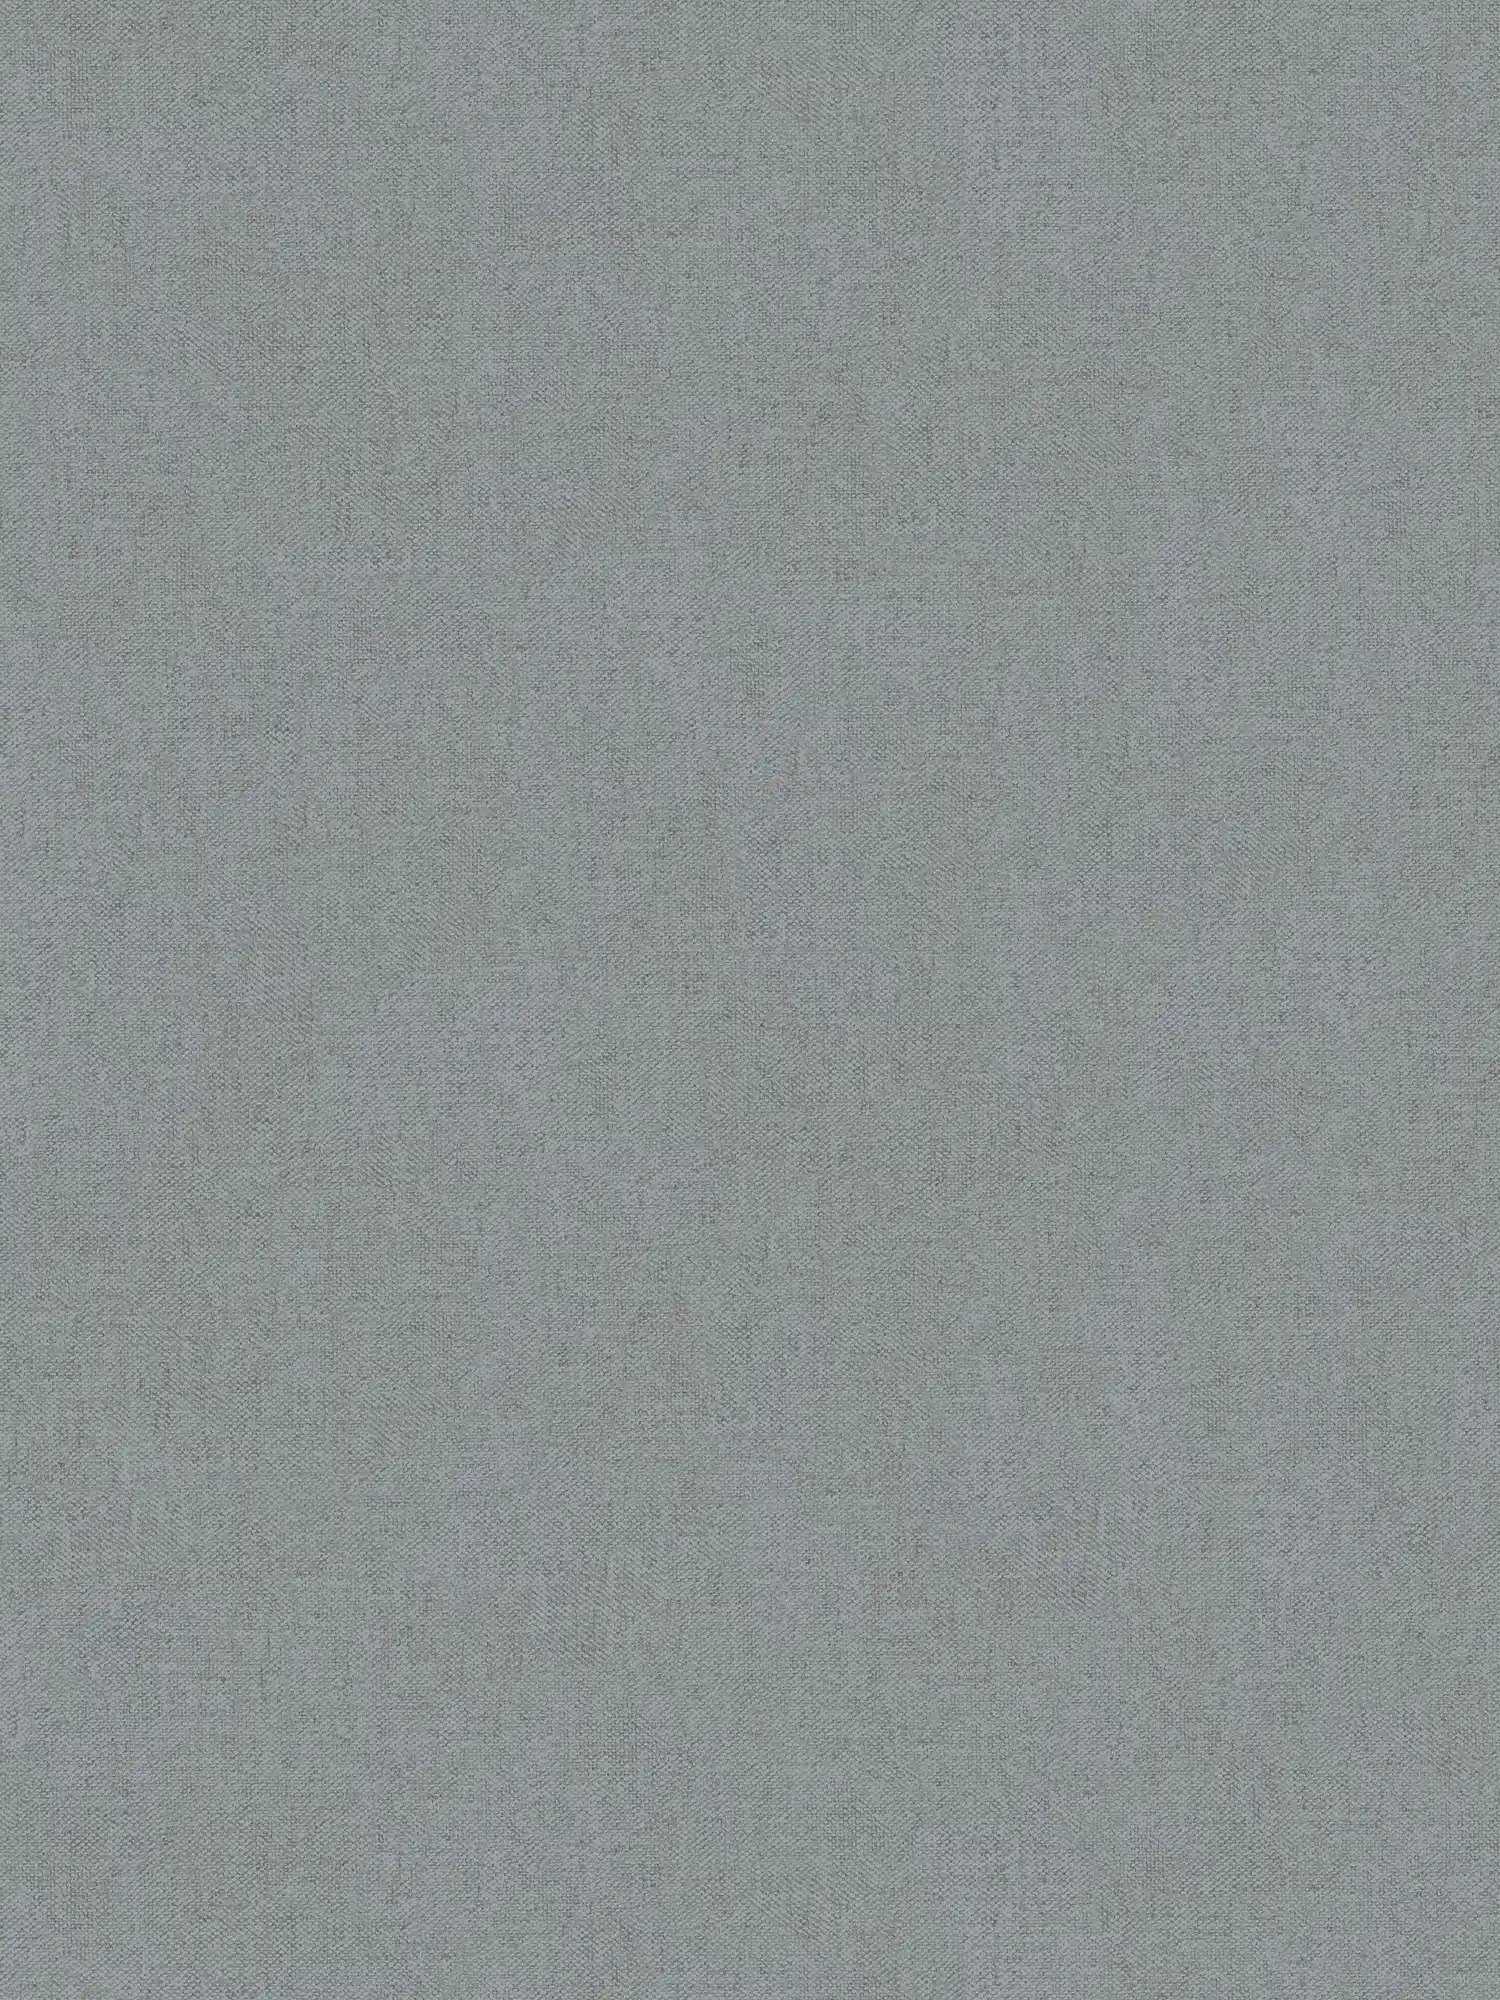 Textile optics wallpaper grey loden with textured pattern
